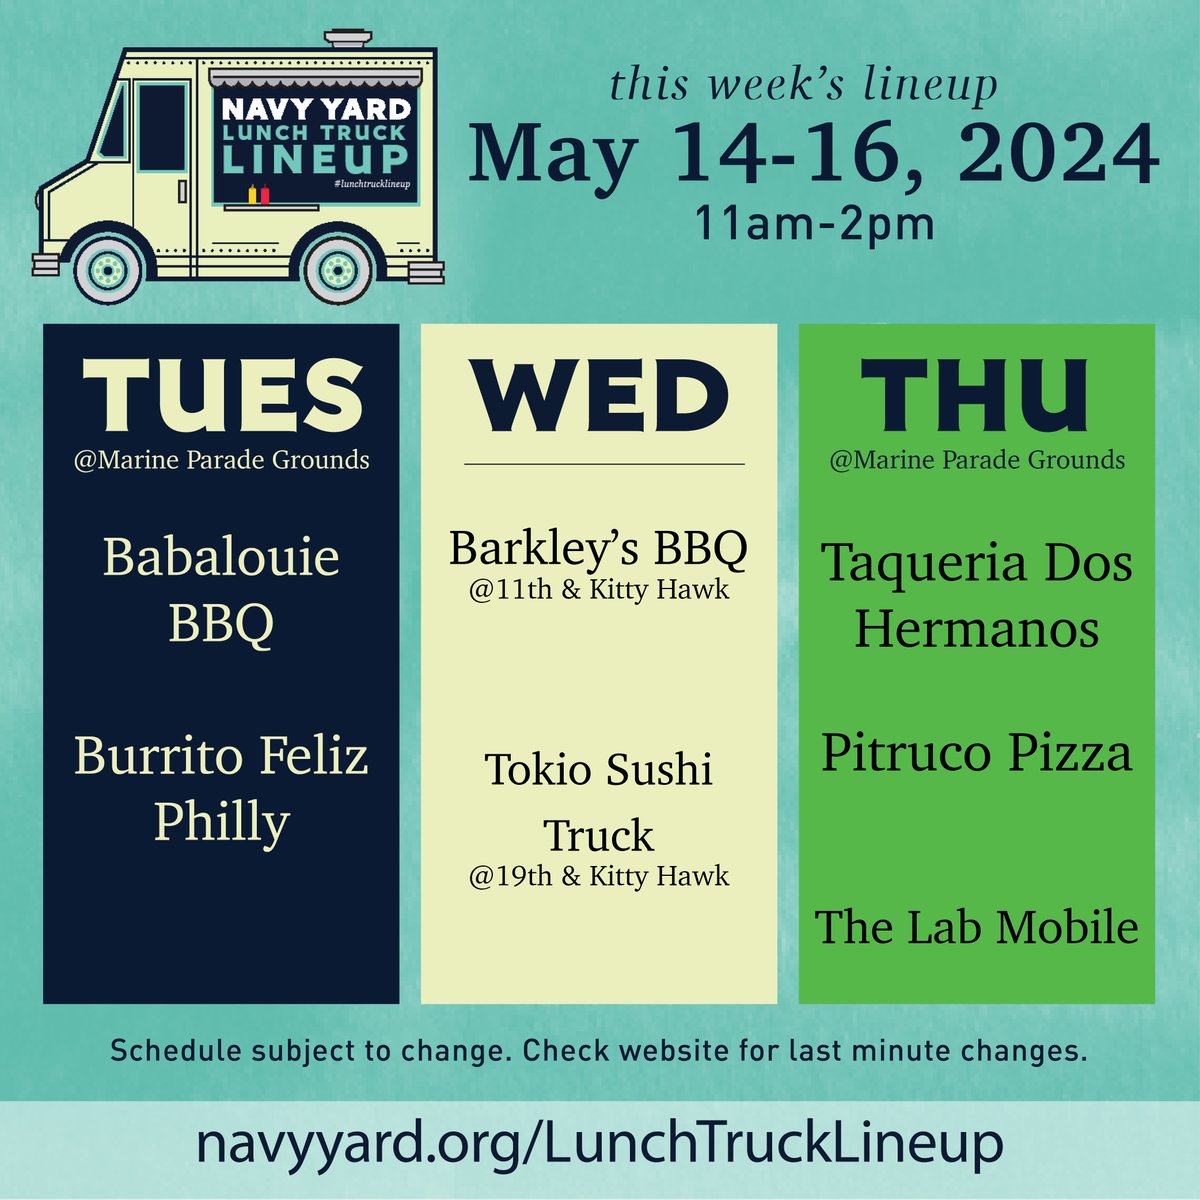 This week's lunch #lunchtrucklineup! Check it out!
navyyard.org/lunchtruckline…
#navyyardeats #discovertheyard #navyyardphilly